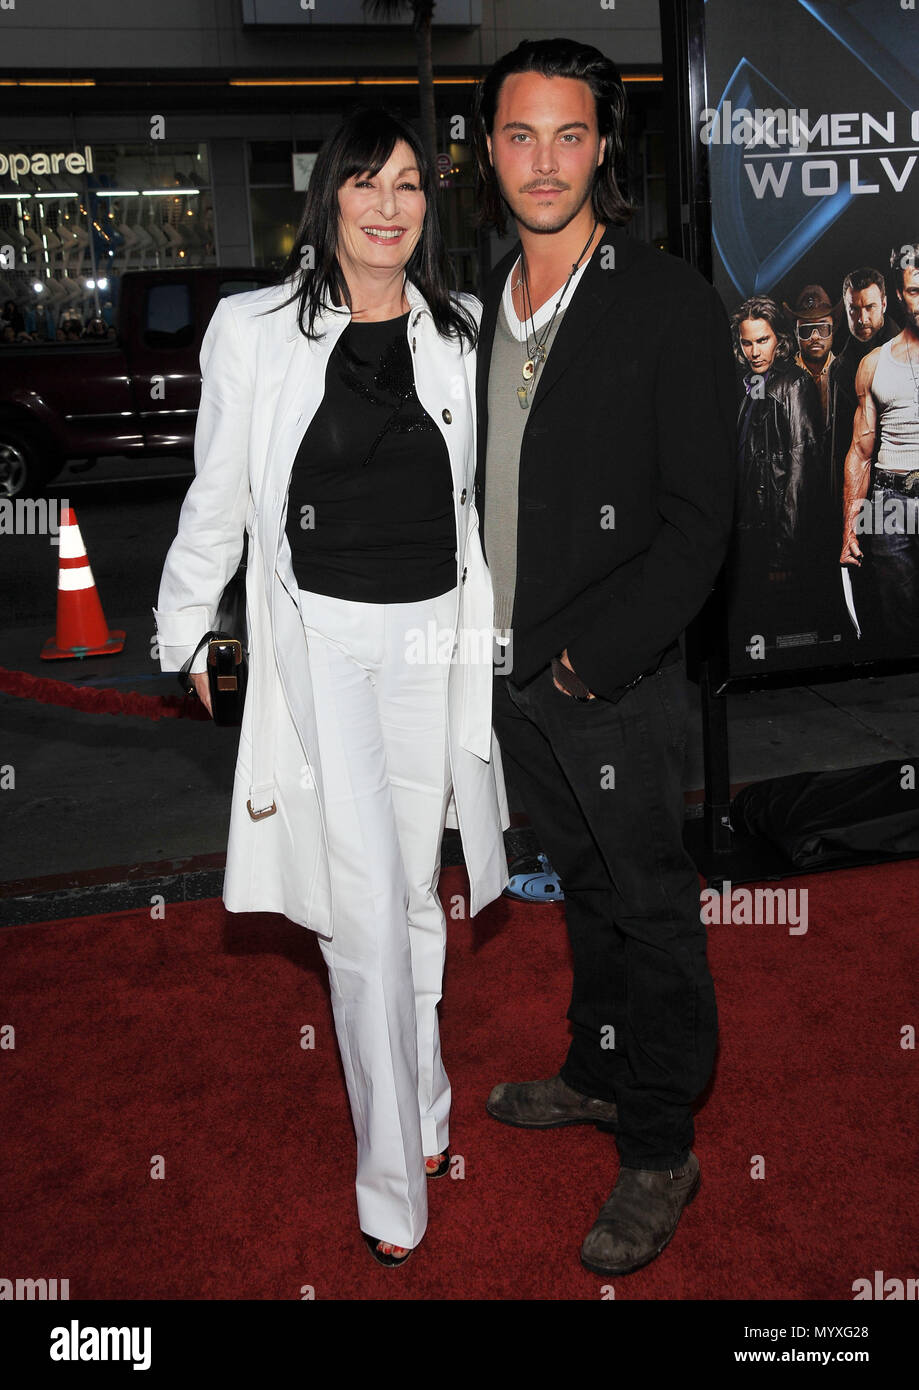 Anjelica Huston and son Jack   - X-Men_Wolverine Industry Screening at the Chinese Theatre In Los Angeles.HustonAnjelica_JackHuston_son_78  Event in Hollywood Life - California, Red Carpet Event, USA, Film Industry, Celebrities, Photography, Bestof, Arts Culture and Entertainment, Celebrities fashion, Best of, Hollywood Life, Event in Hollywood Life - California, Red Carpet and backstage, Music celebrities, Topix, Couple, family ( husband and wife ) and kids- Children, brothers and sisters inquiry tsuni@Gamma-USA.com, Credit Tsuni / USA, 2006 to 2009 Stock Photo